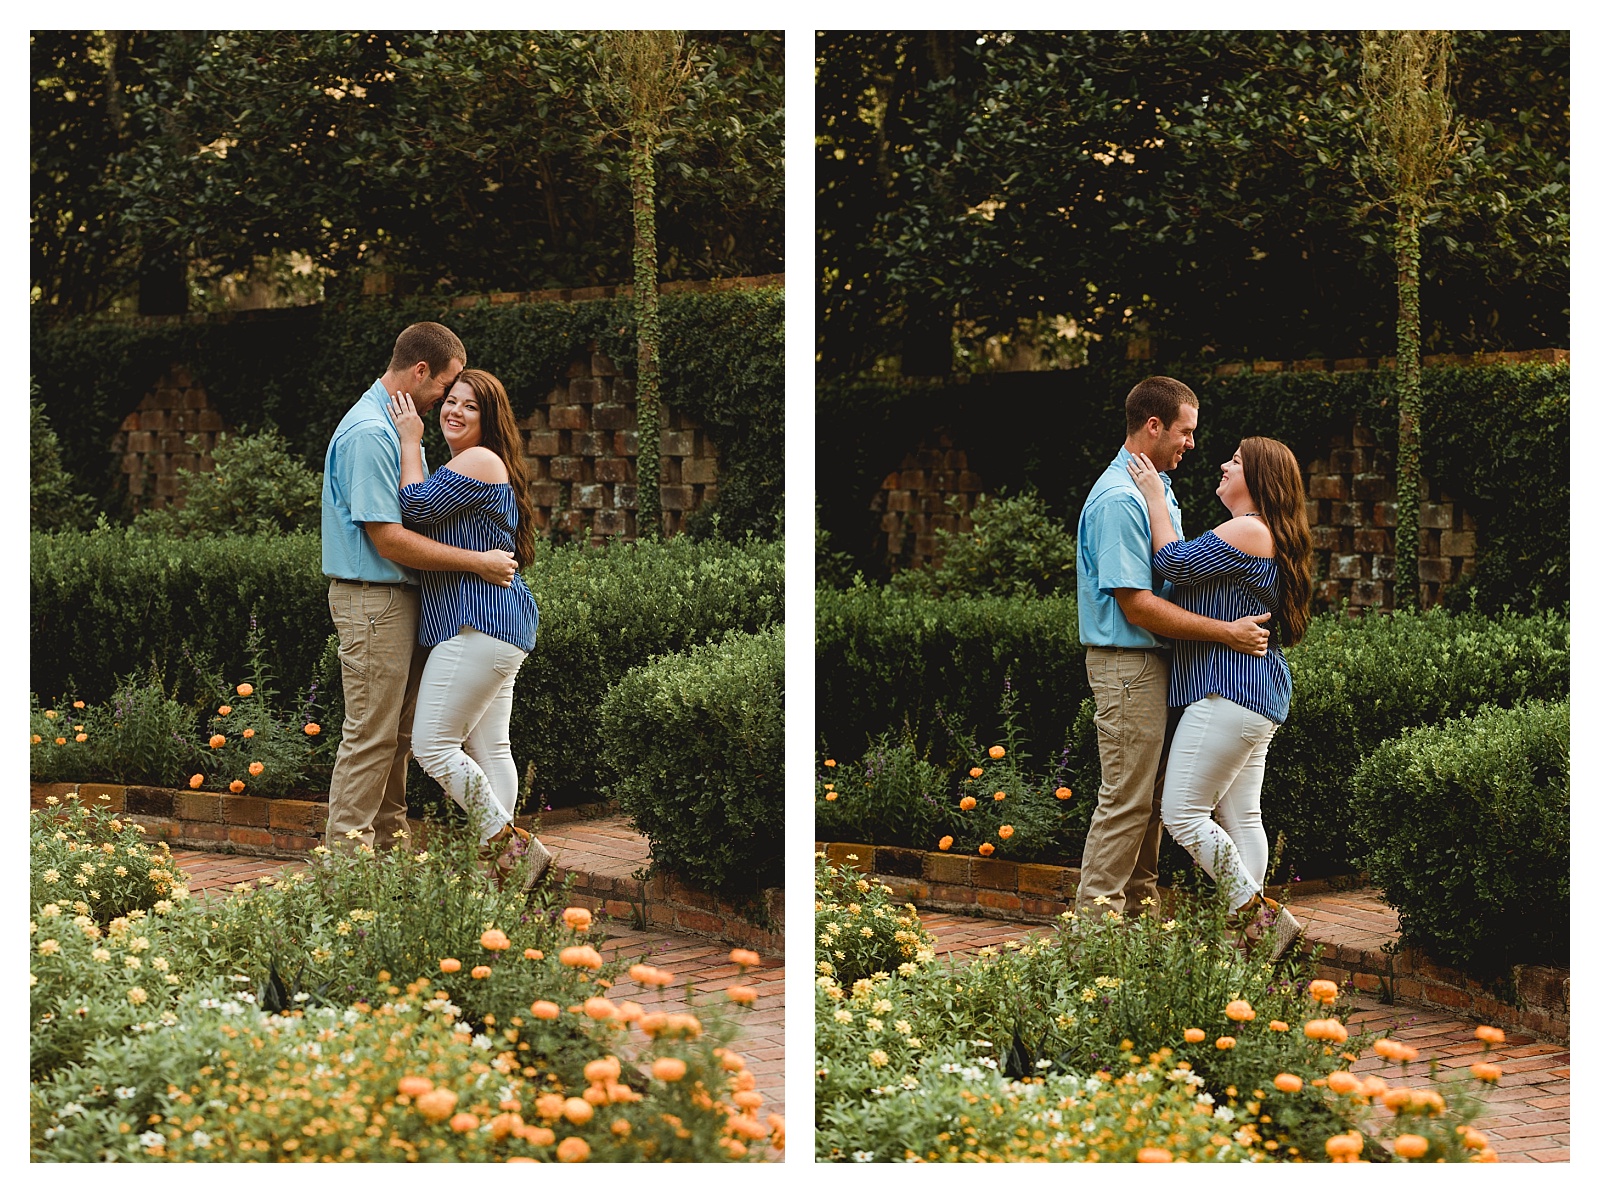 Maclay gardens Florida engagement pictures. Shelly Williams Photography